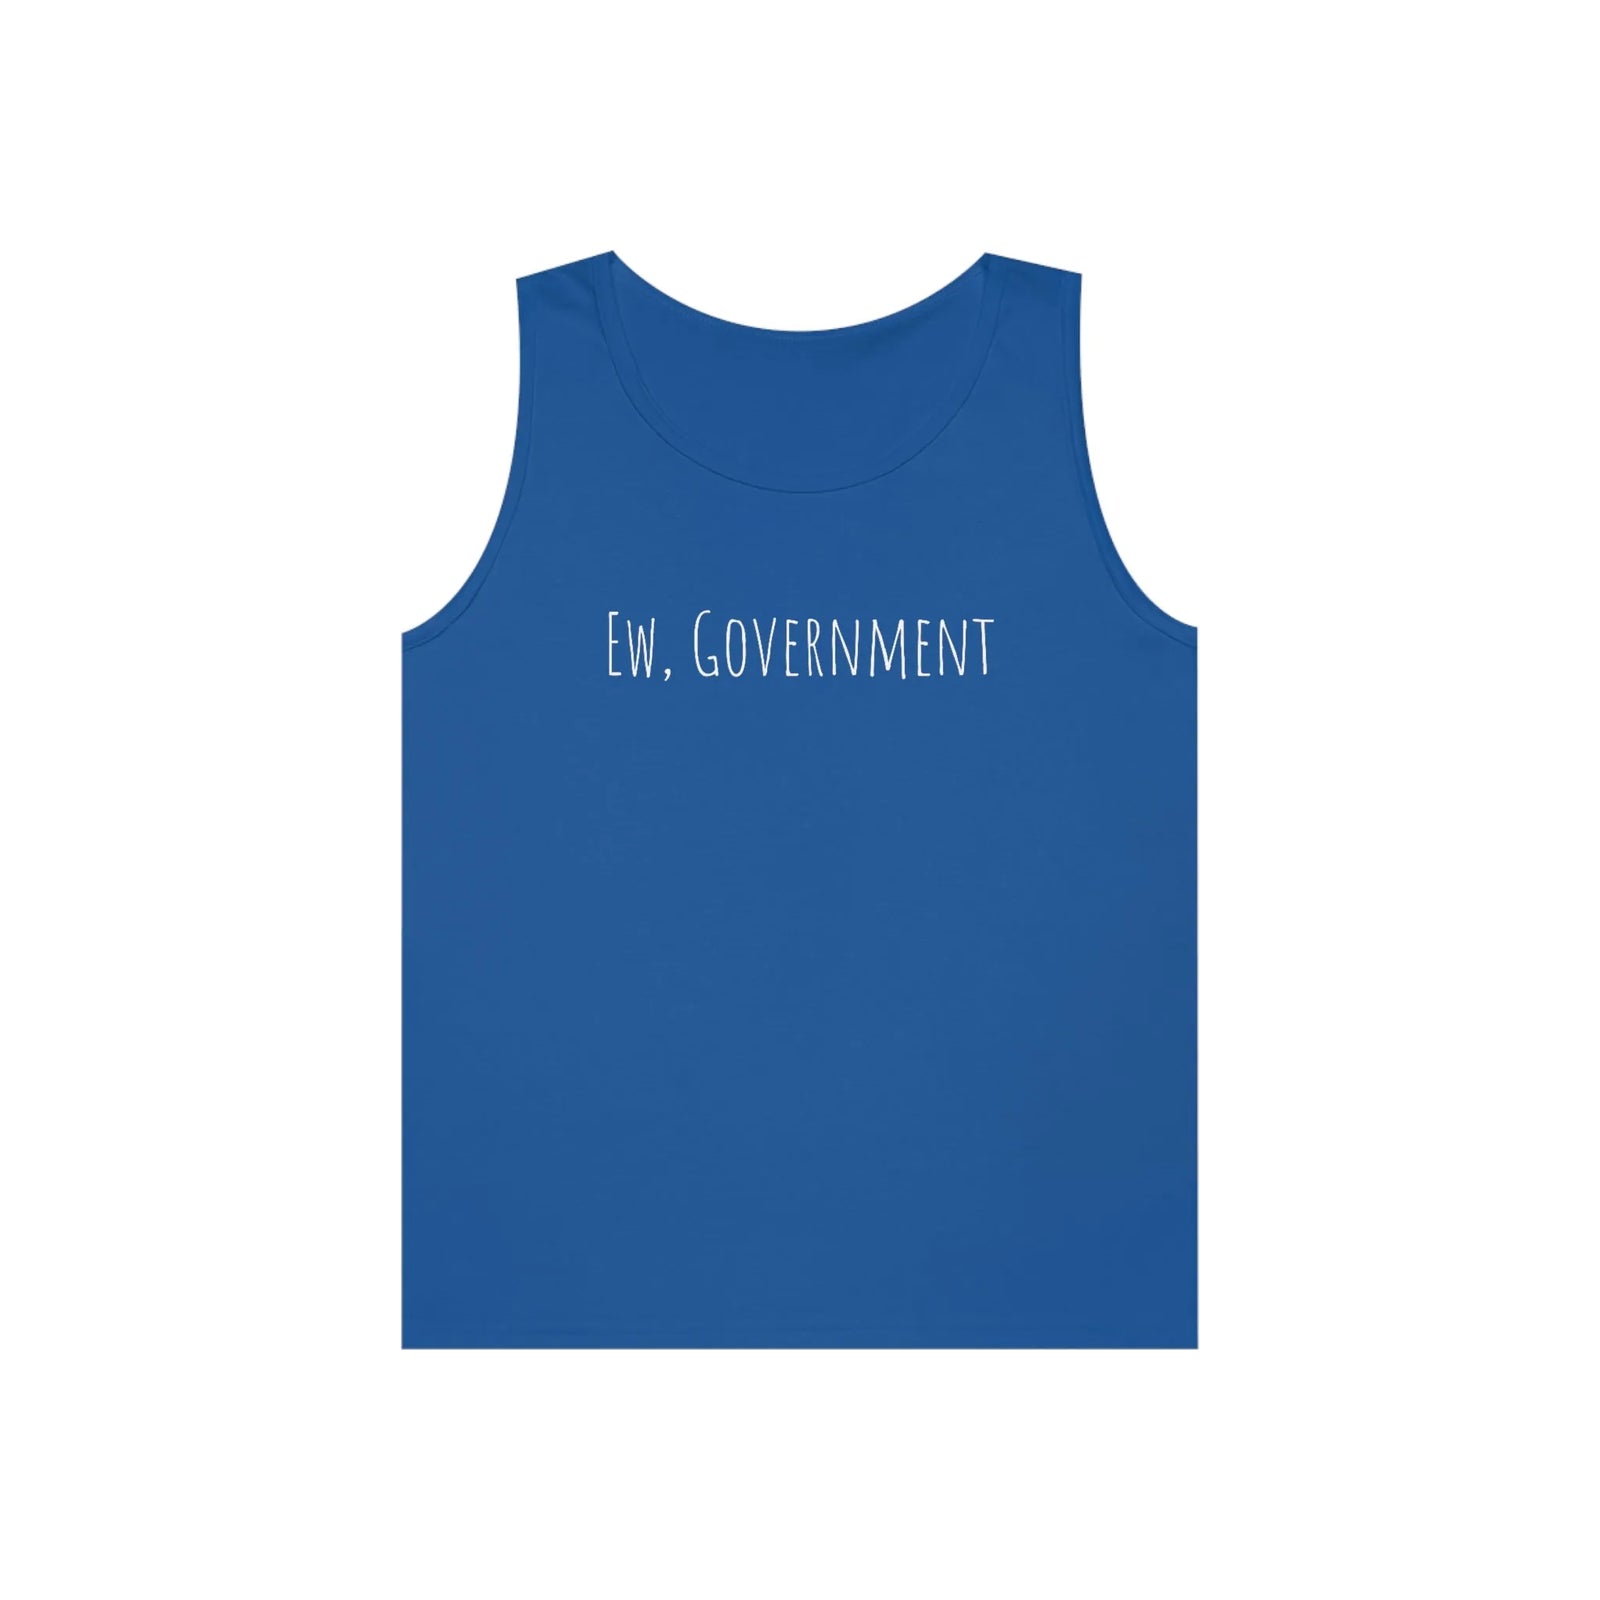 Ew, Government Tank Top